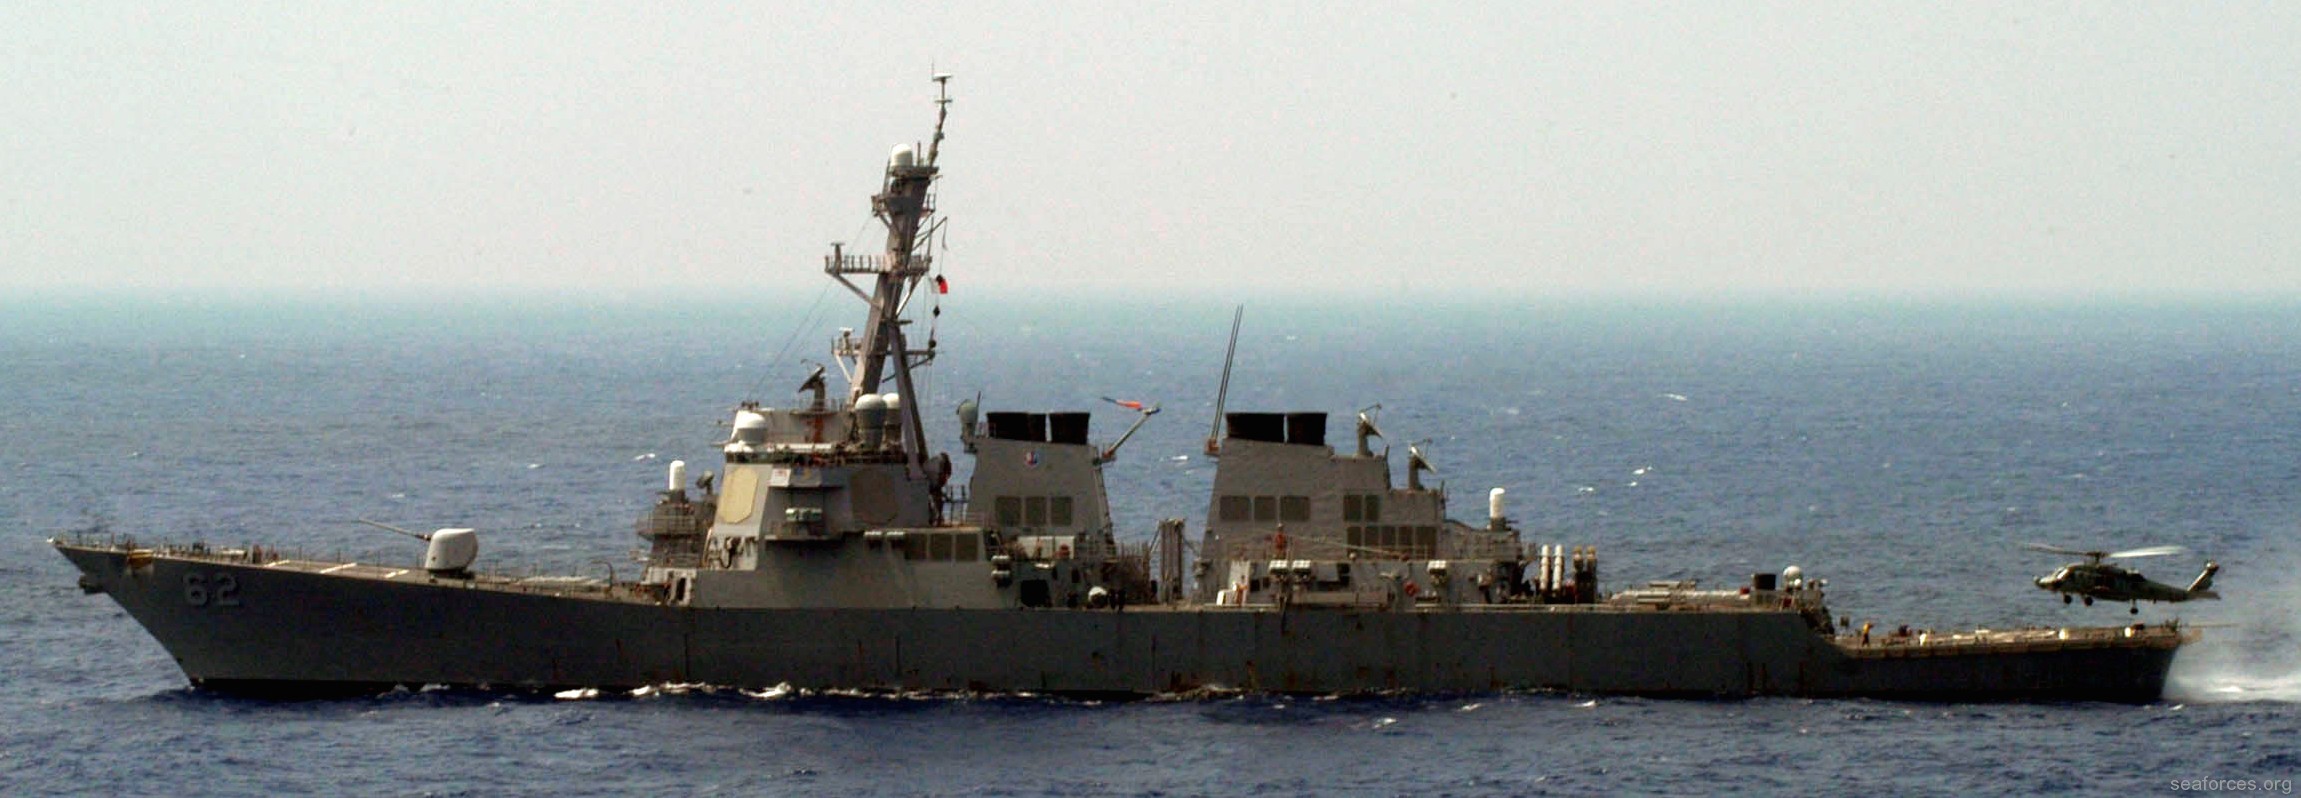 ddg-62 uss fitzgerald guided missile destroyer 2005 91 seahawk helicopter lamps iii